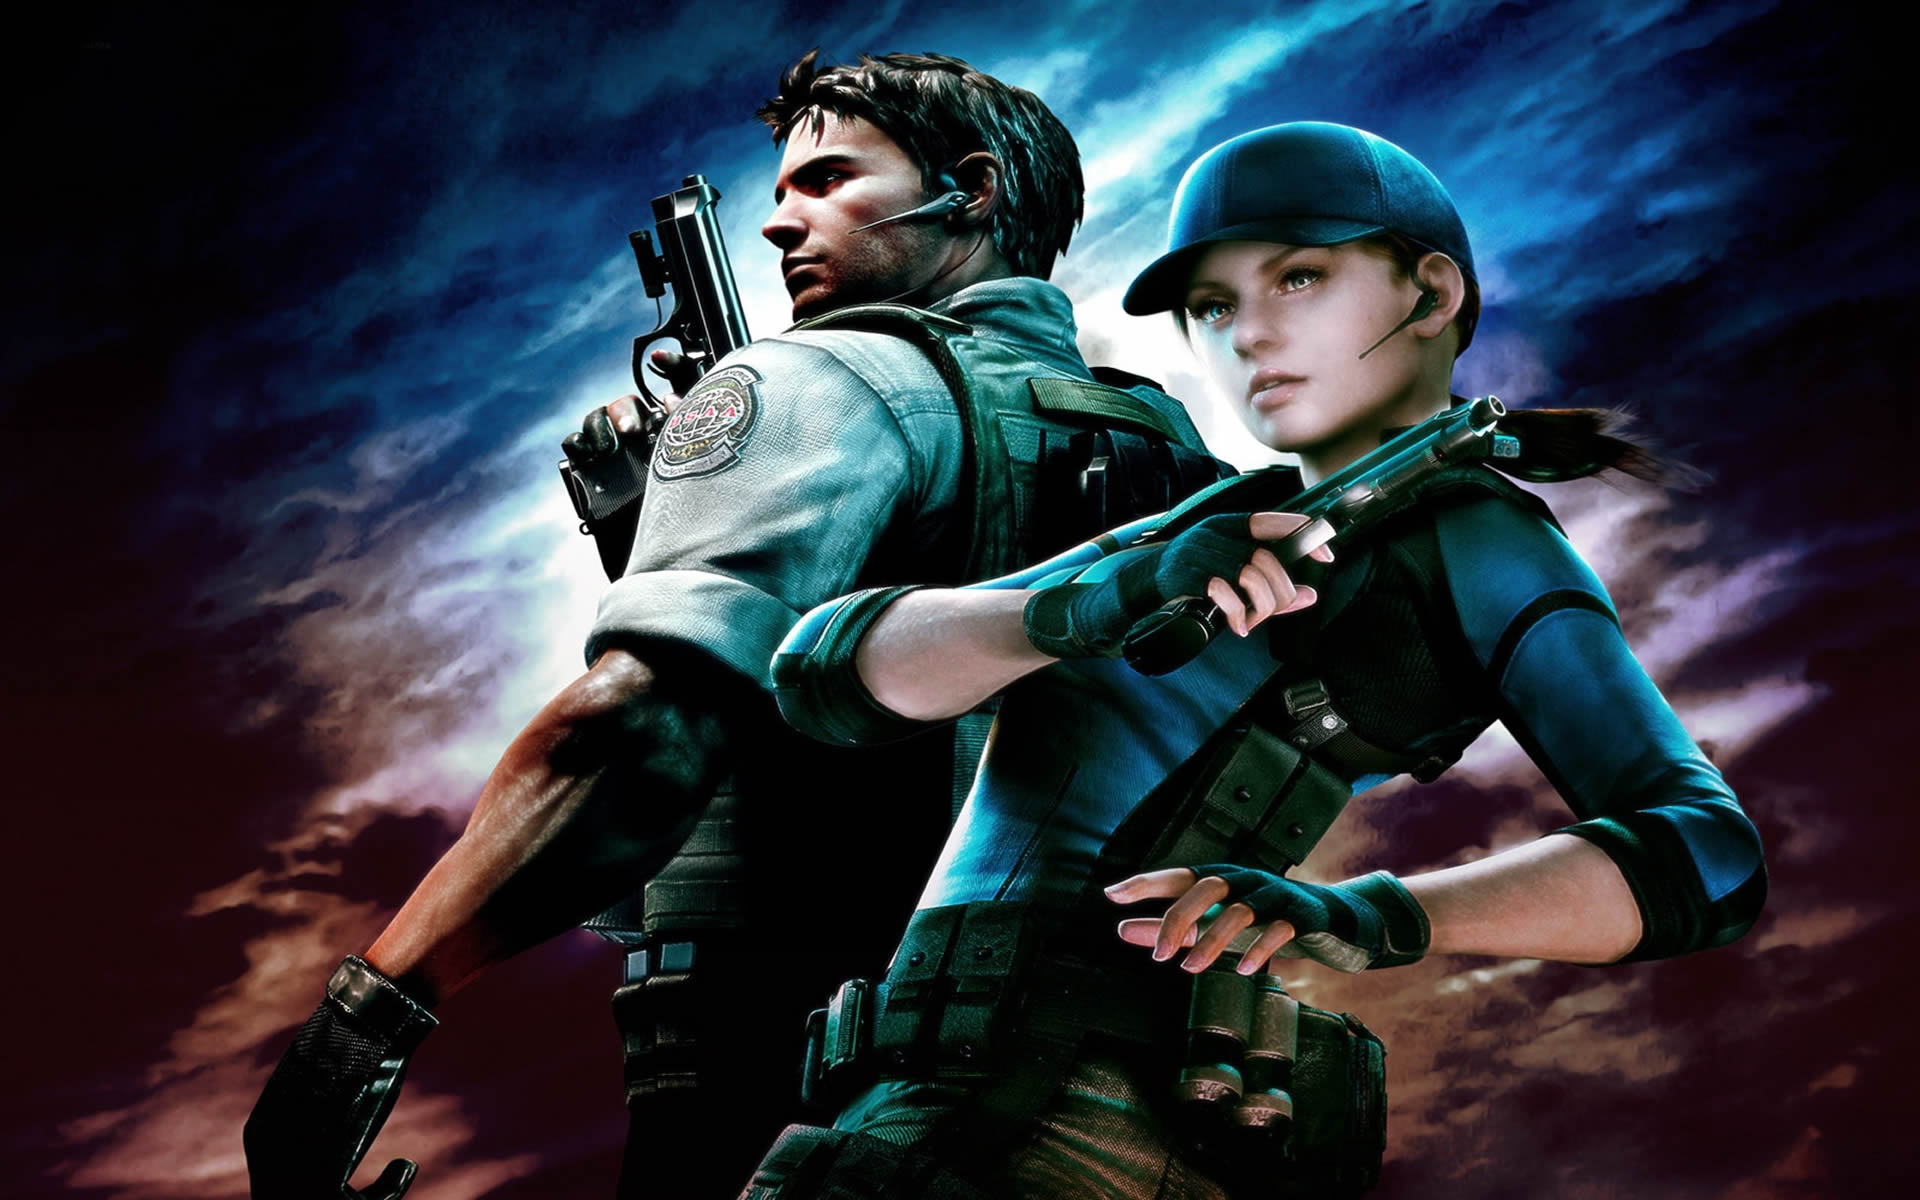 Chris Redfield And Jill Valentine Scary Games Wallpaper Image